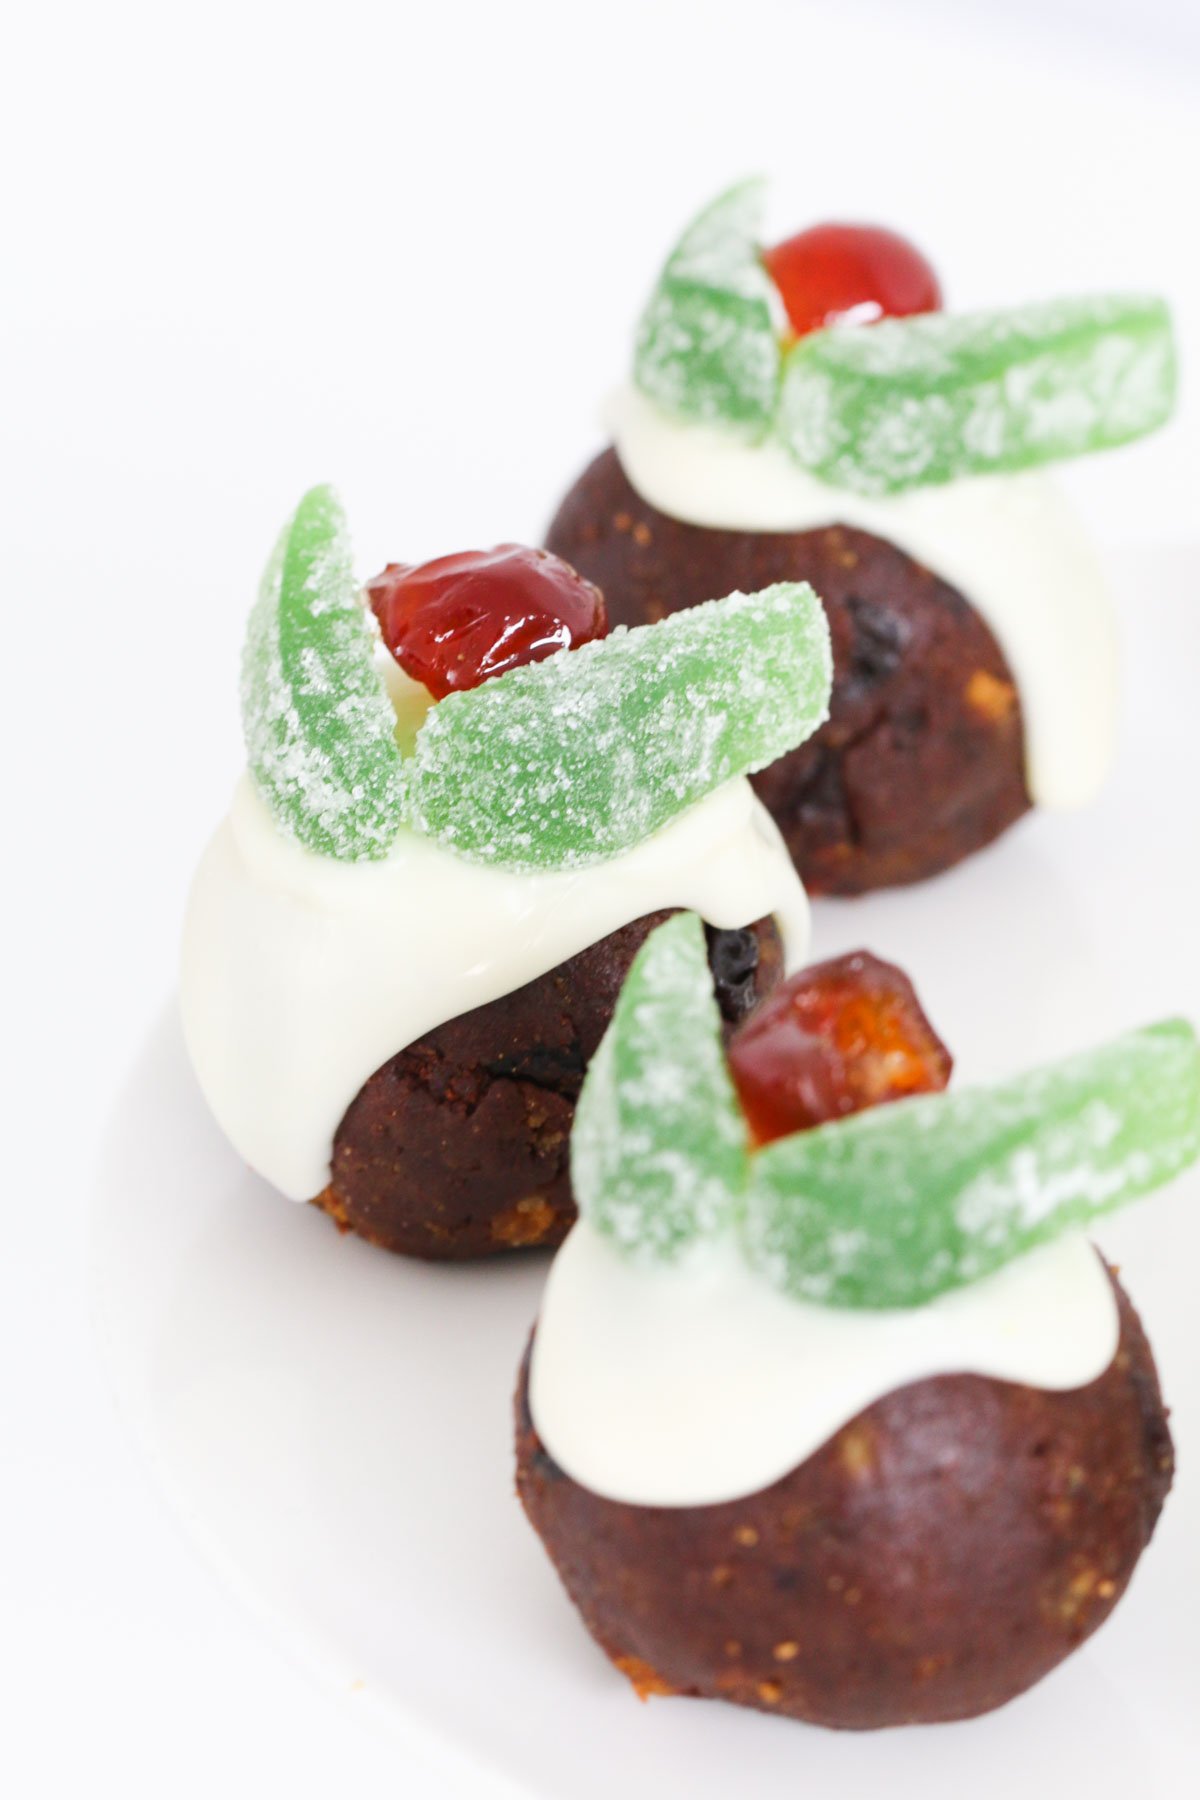 Christmas pudding balls decorated with whte chocolate, spearmint leaves and a glace cherry.